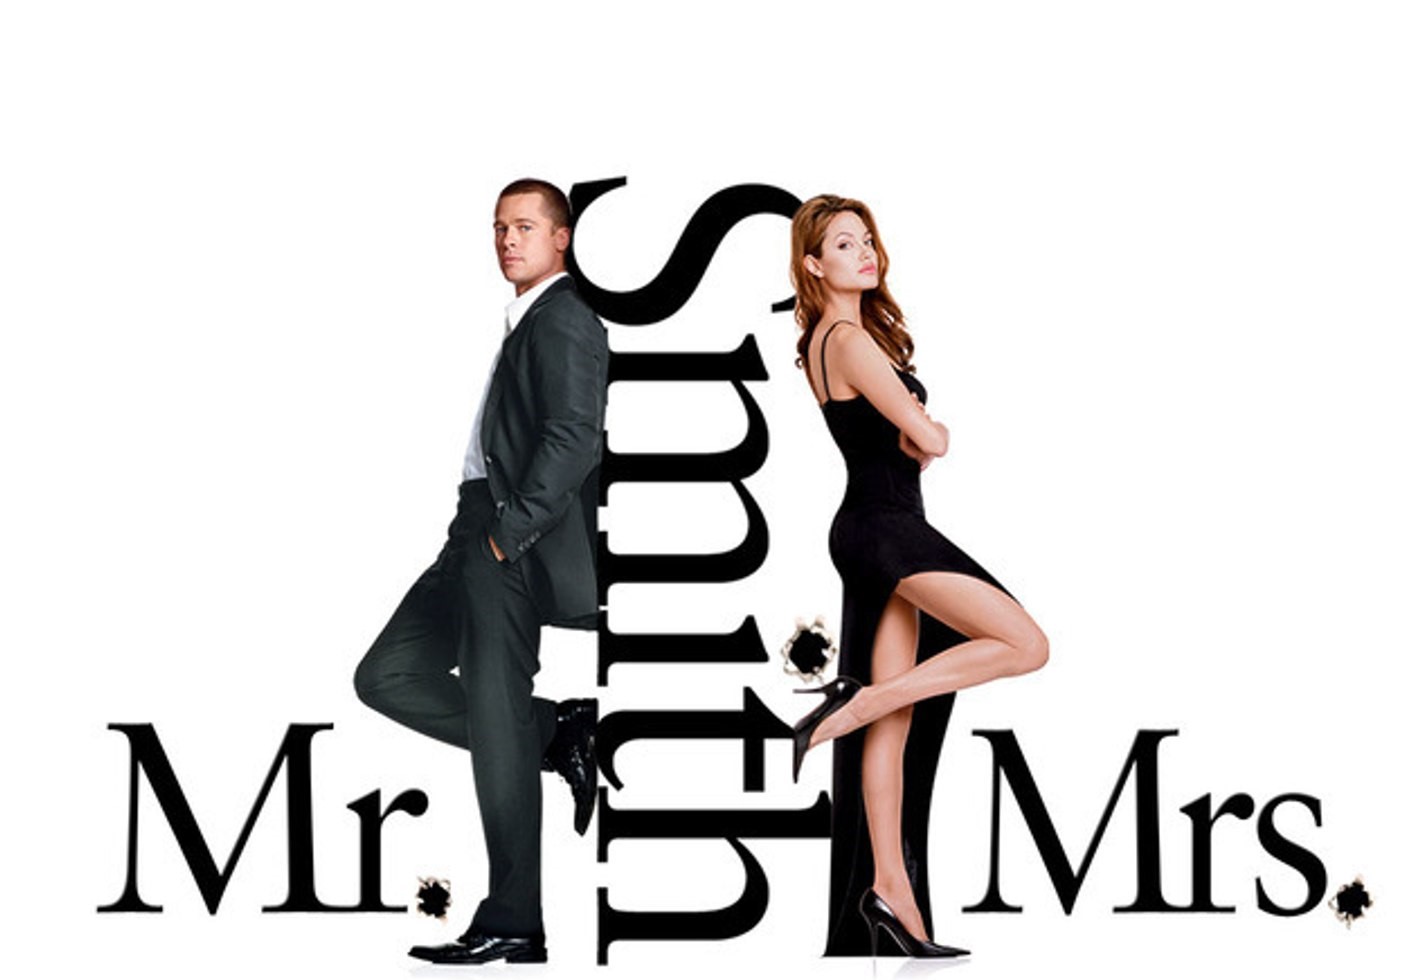 mr and mrs smith.jpg